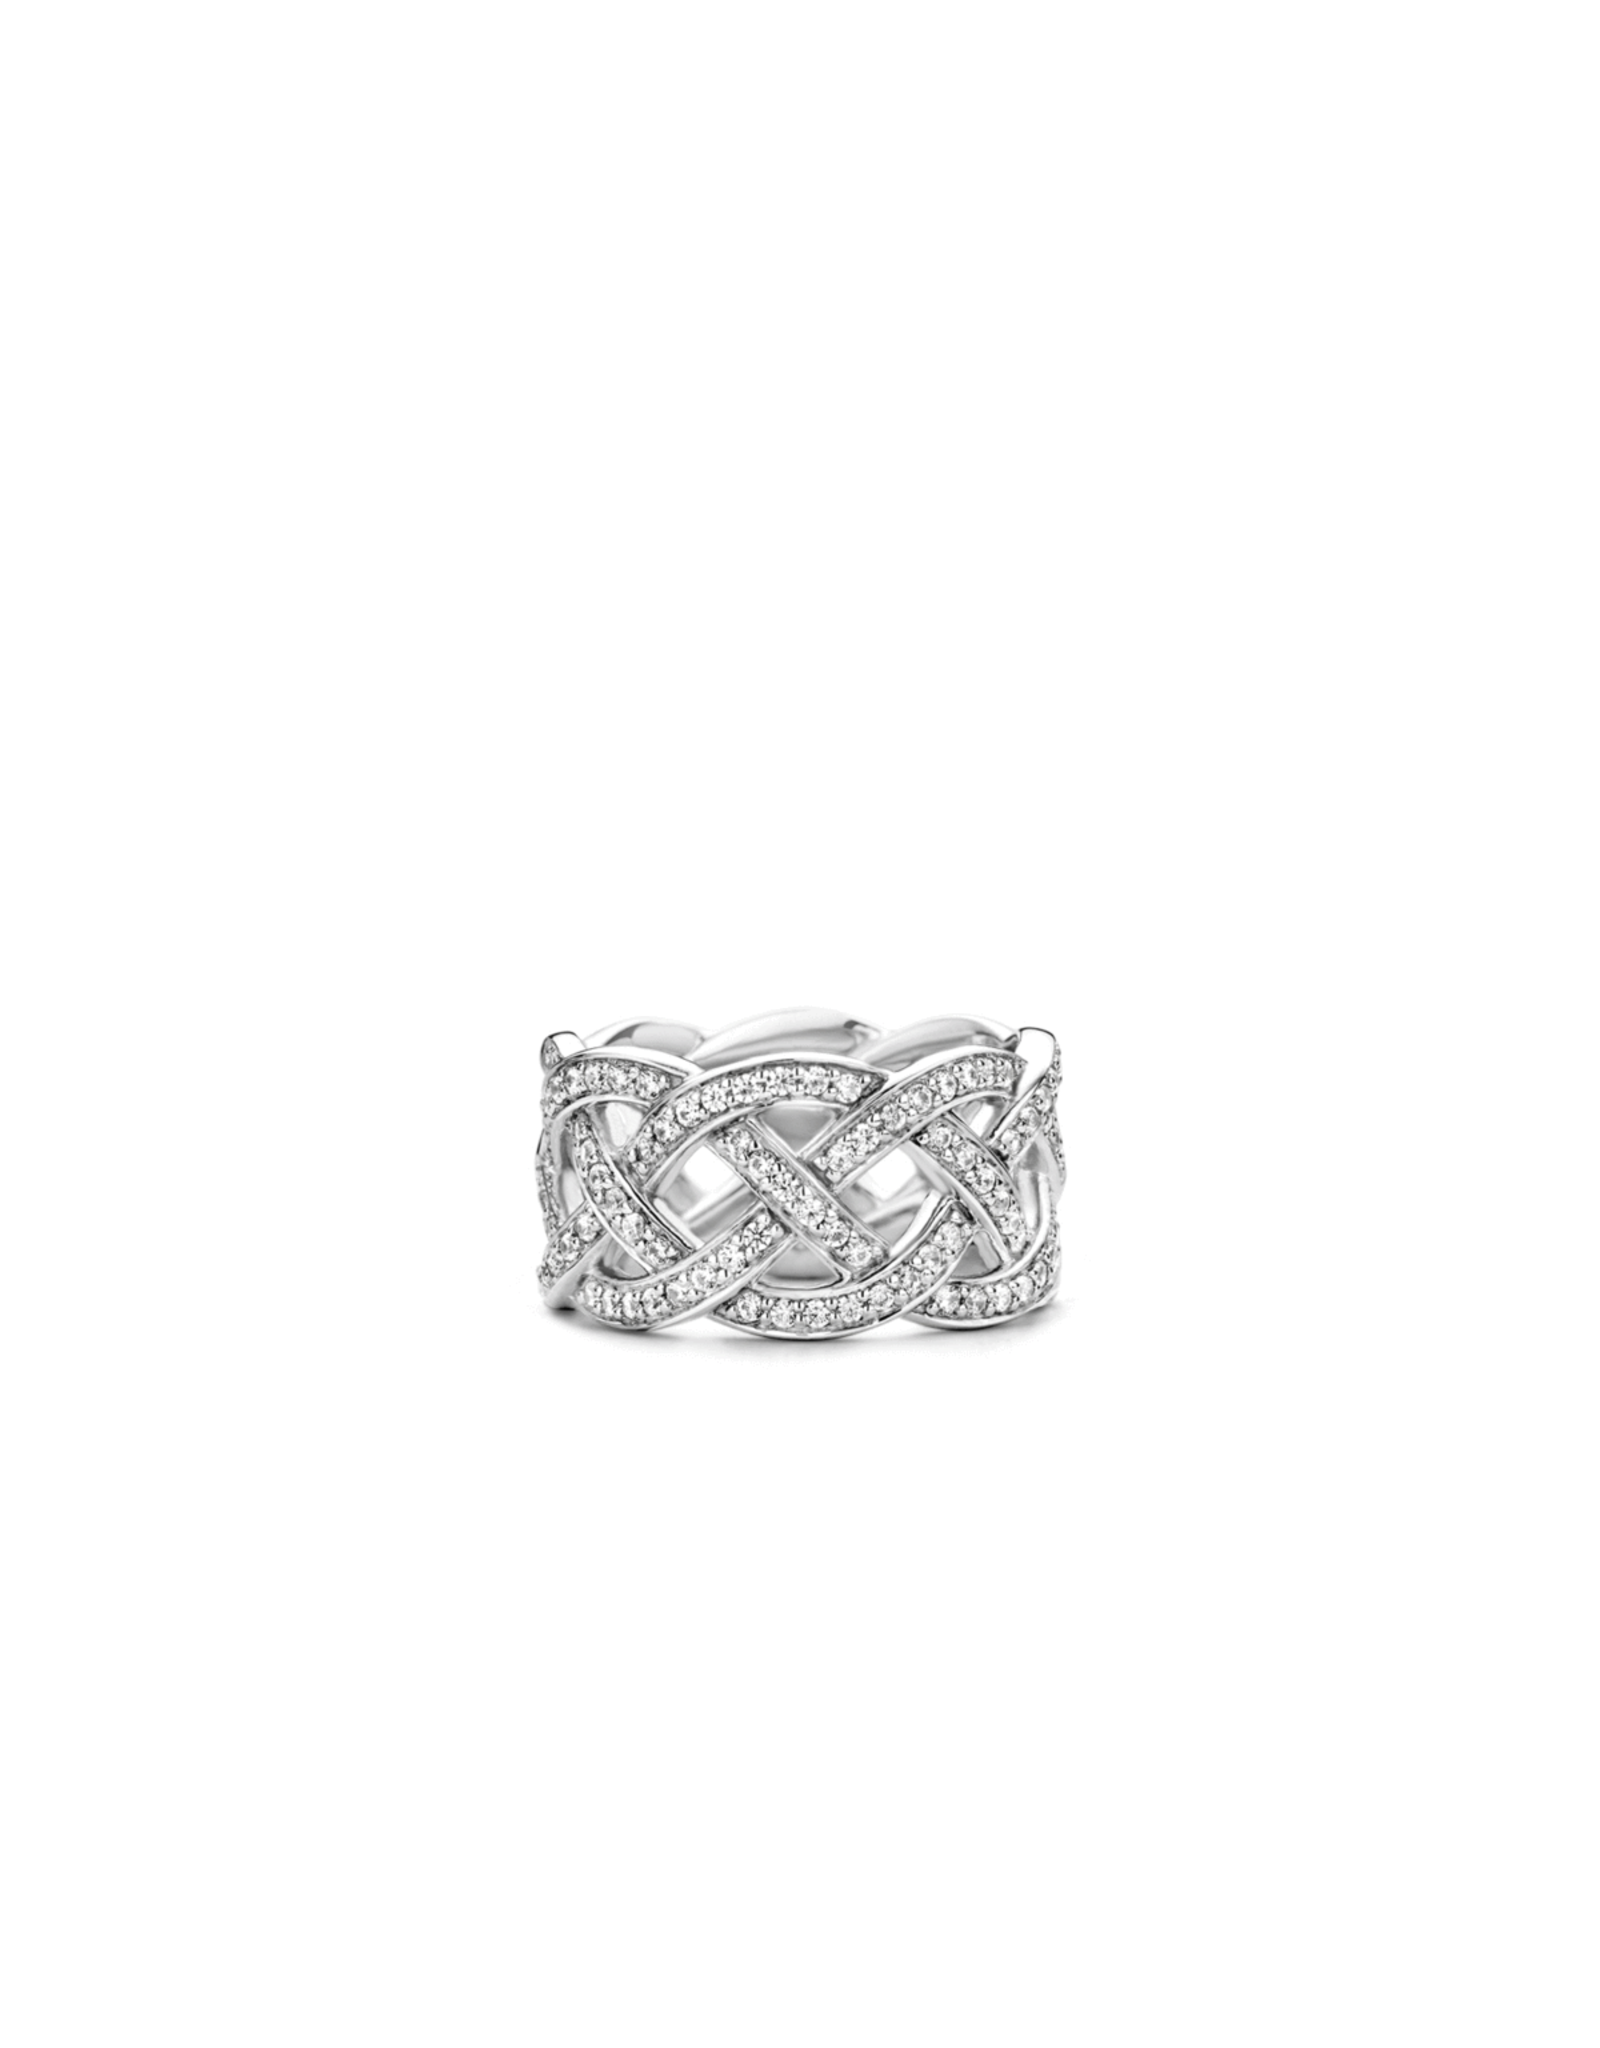 Silver Interlaced Ring with Zirconias - 12026ZI/56